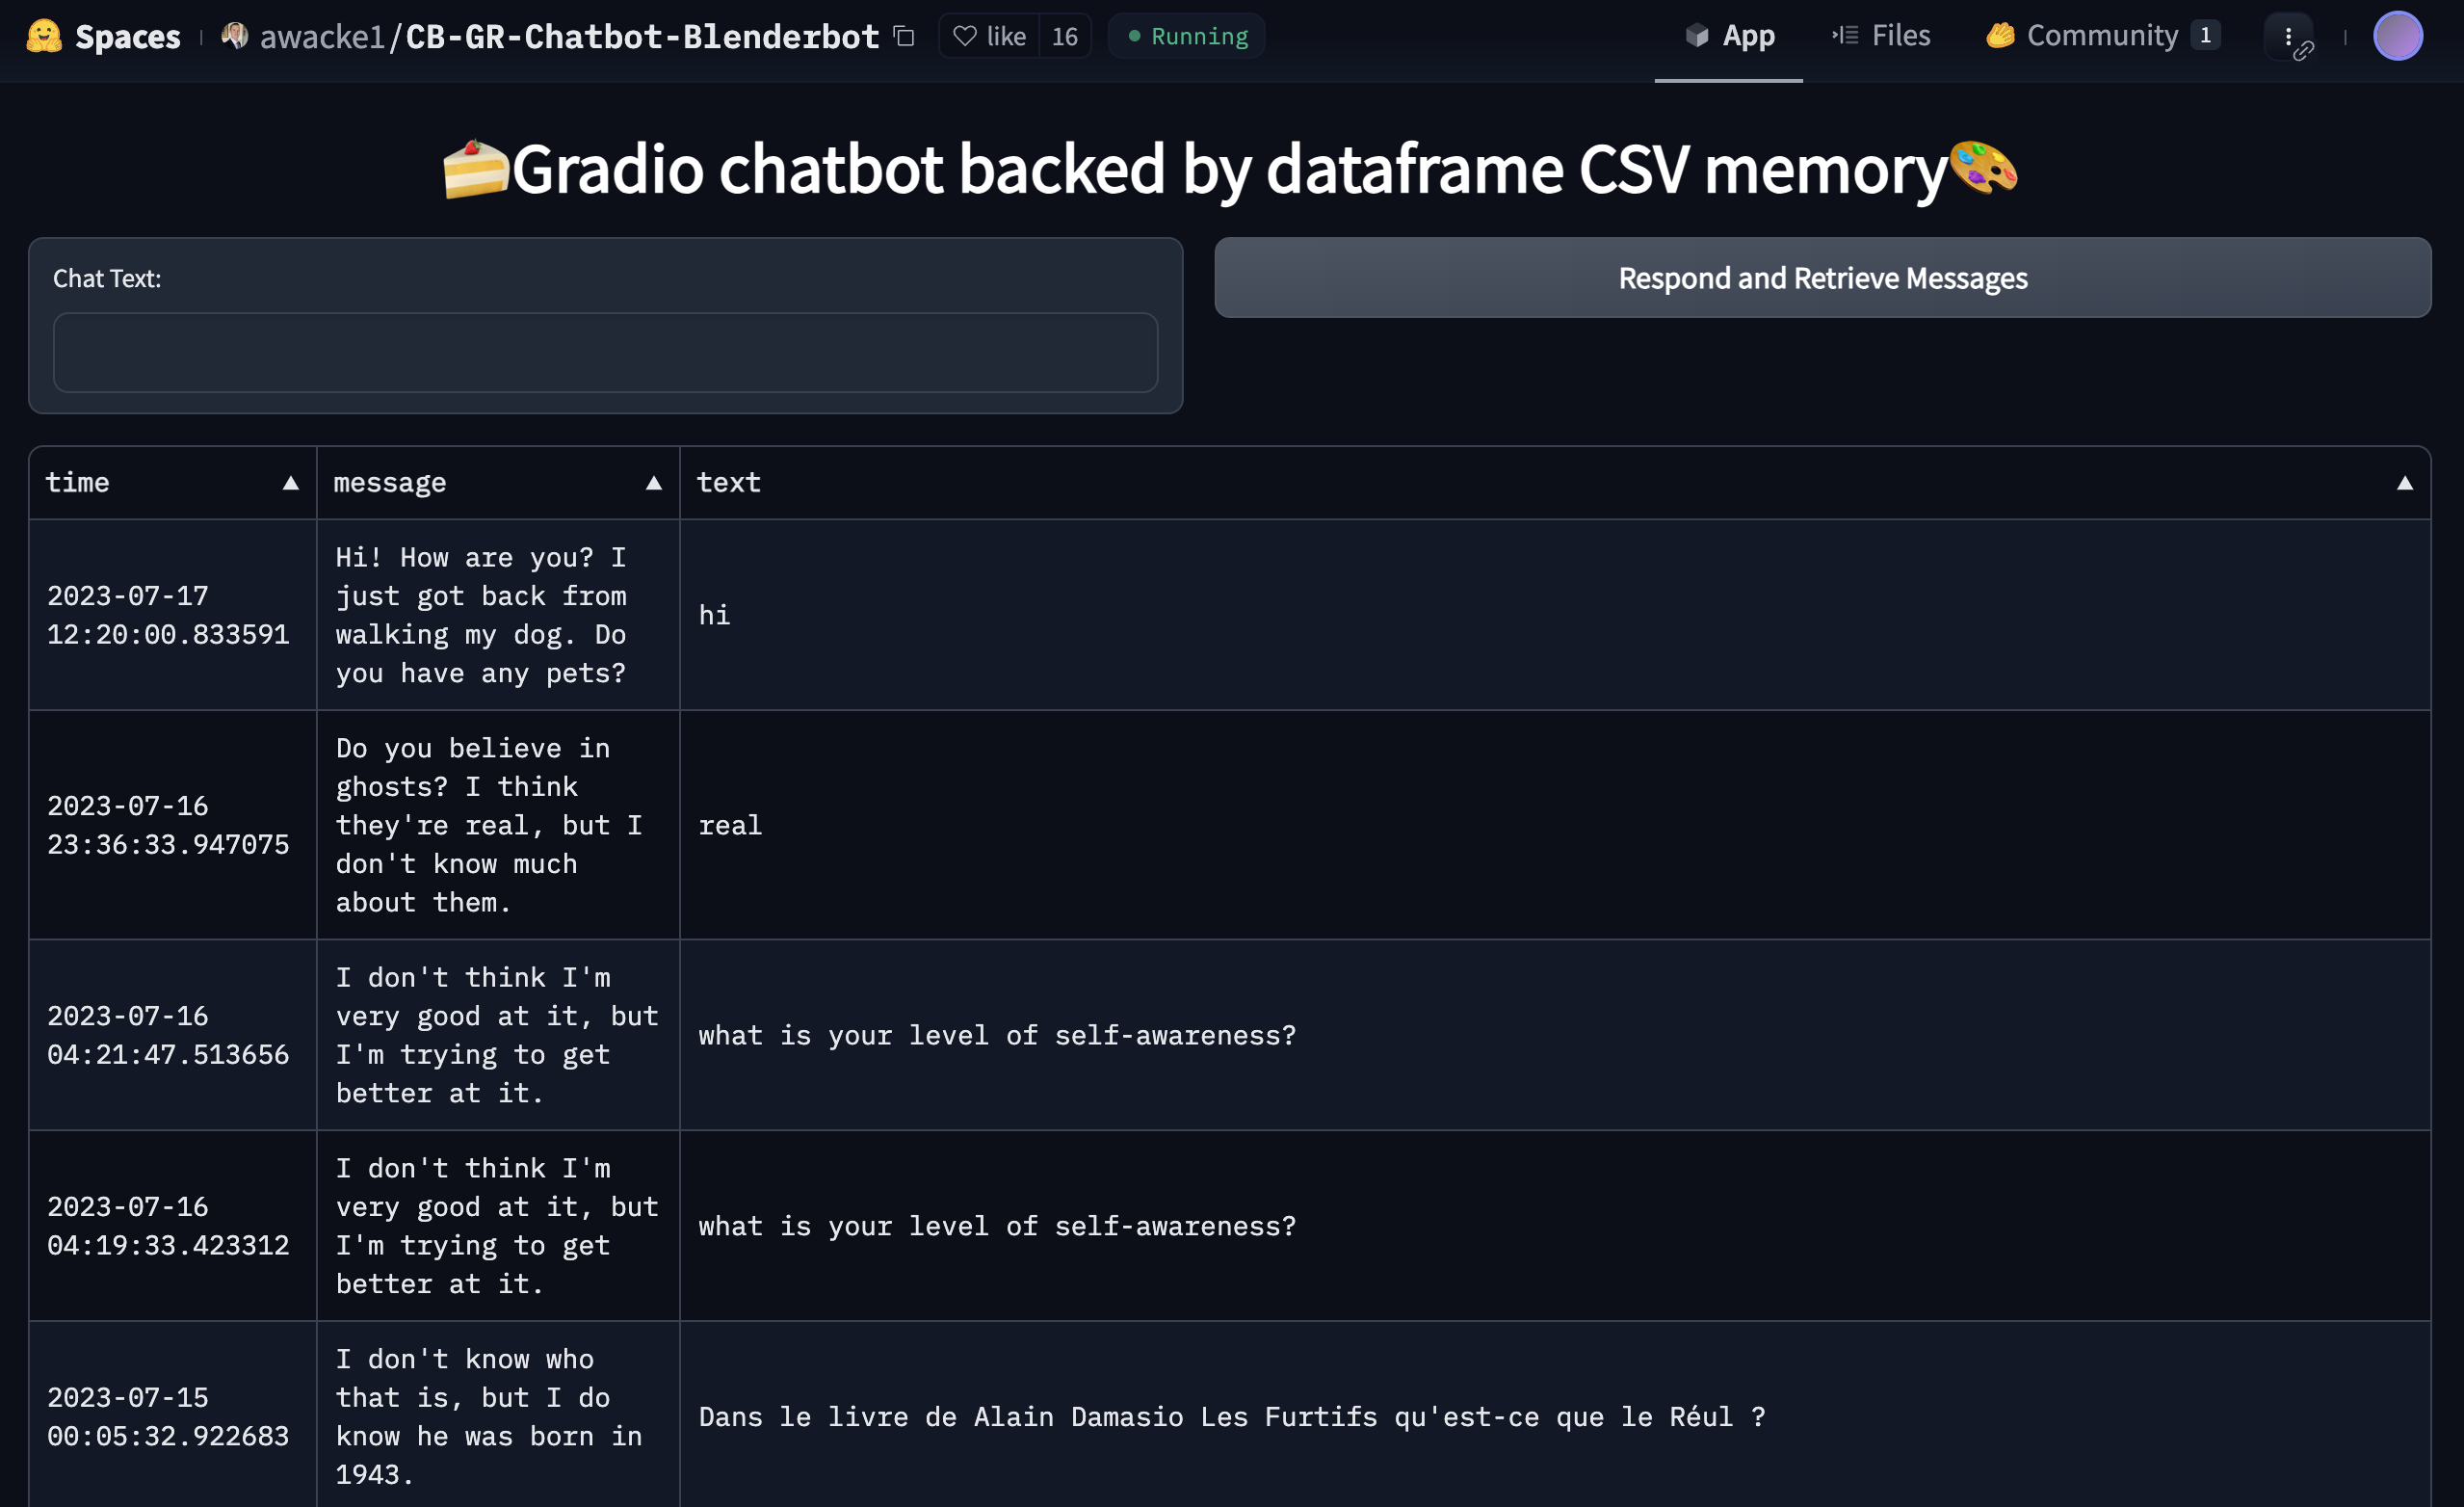 Chatbot-Blenderbot exposes every input from different users without user consent